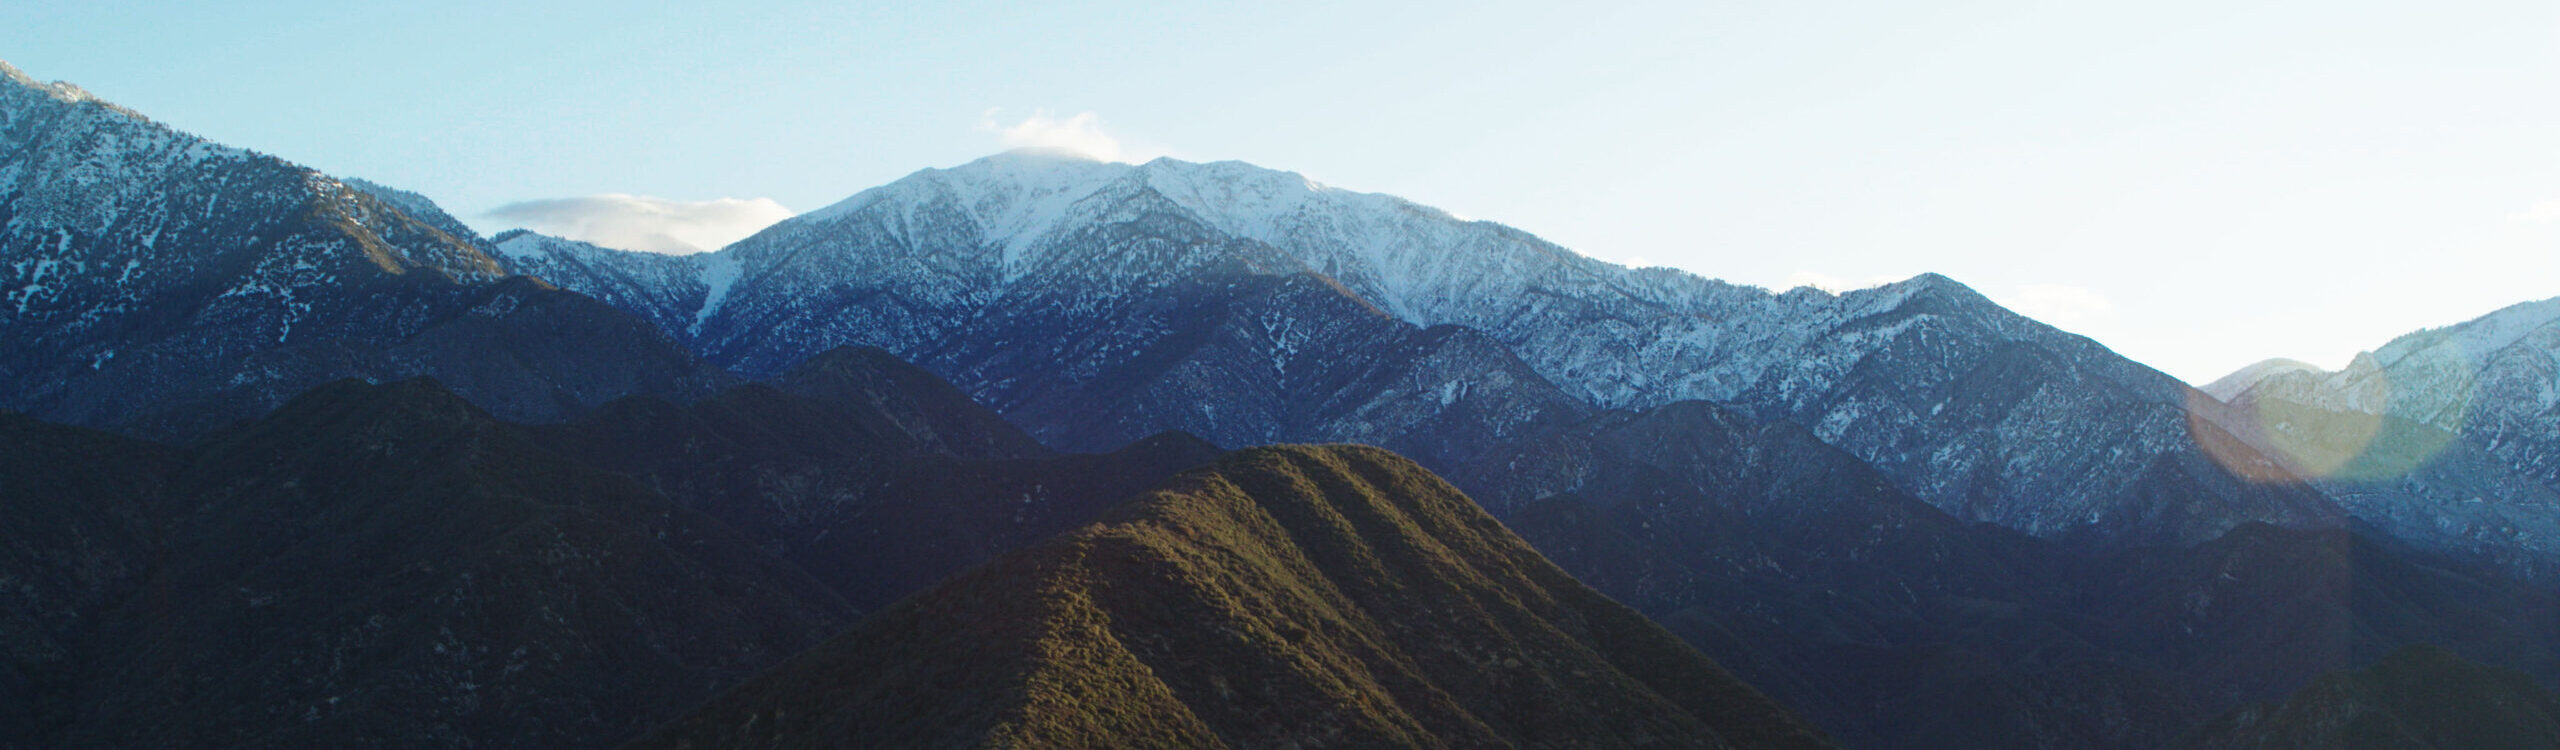 Witness the serene beauty of sunrise at Mount Baldy, with snow adorning its peaks, the wind blowing snowflakes, and a hint of a lens flare as the sun rises.